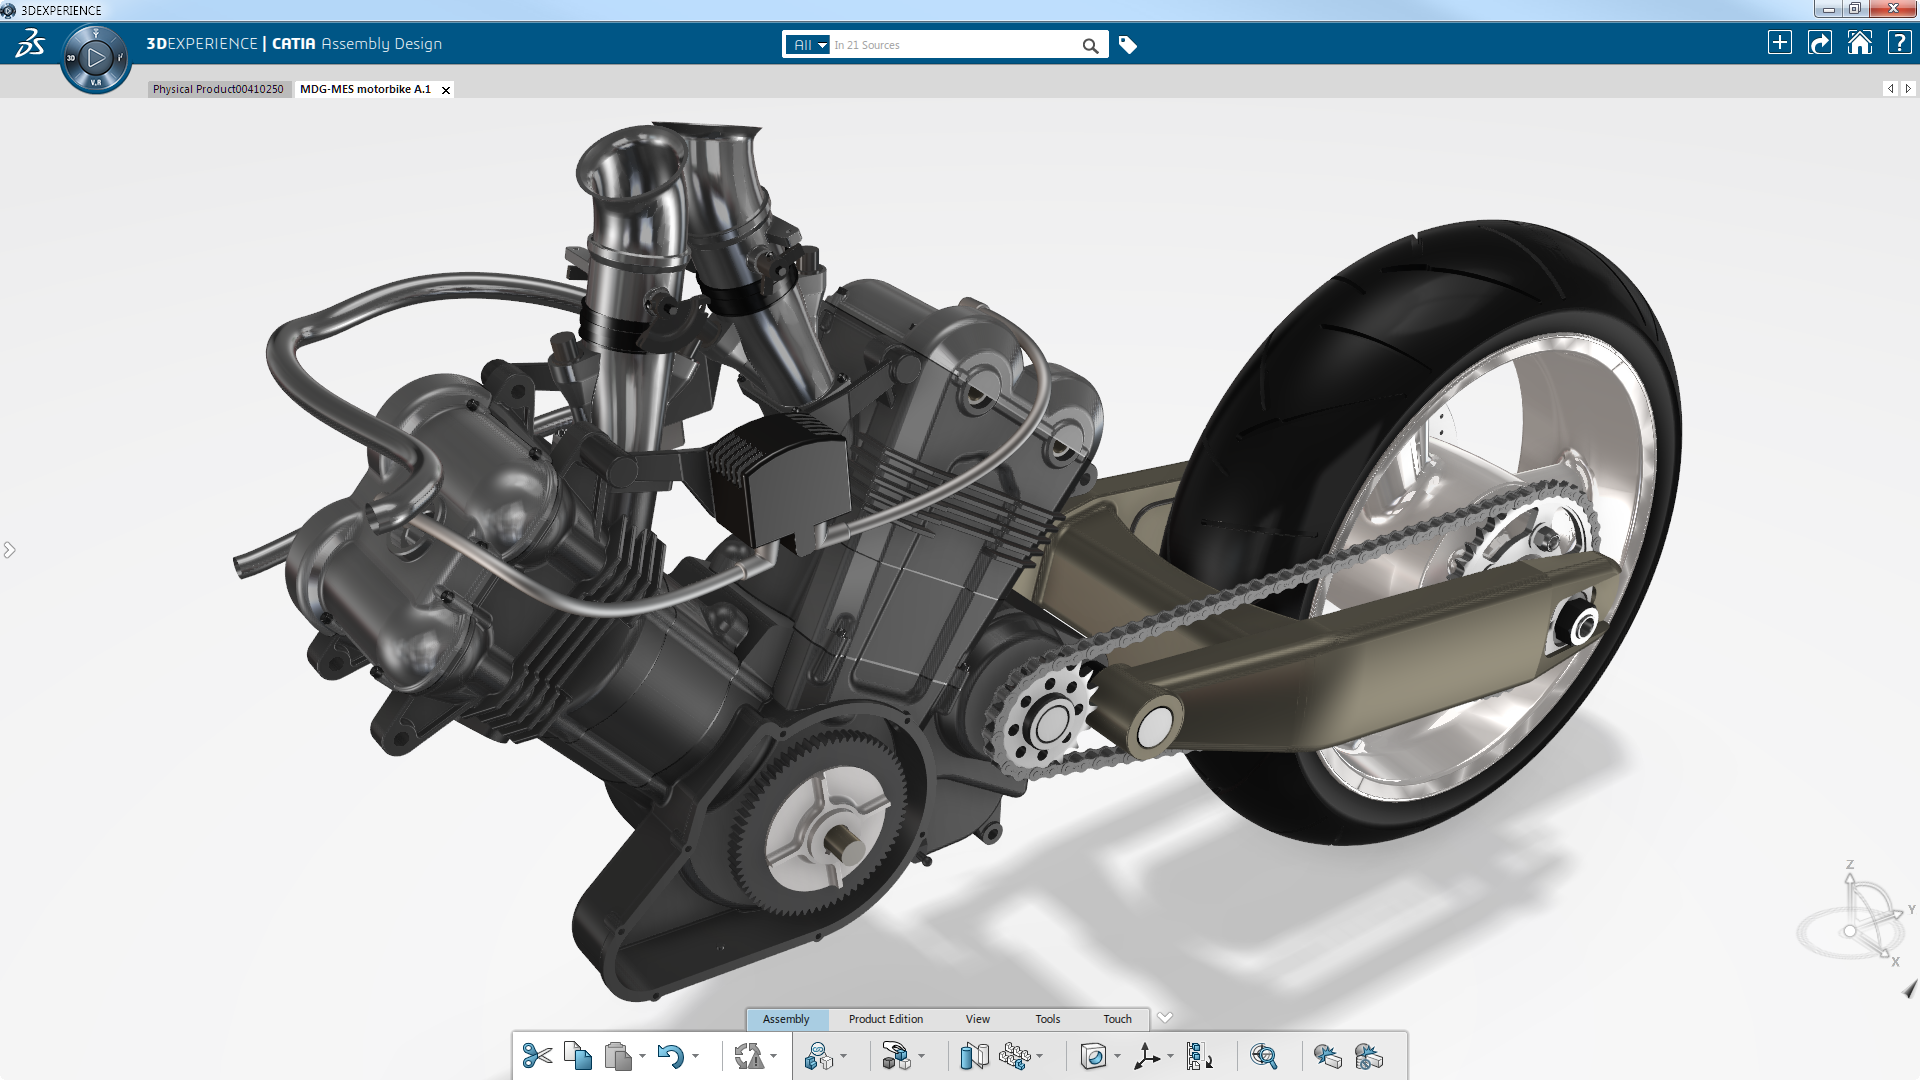 OUR CATIA OFFERS